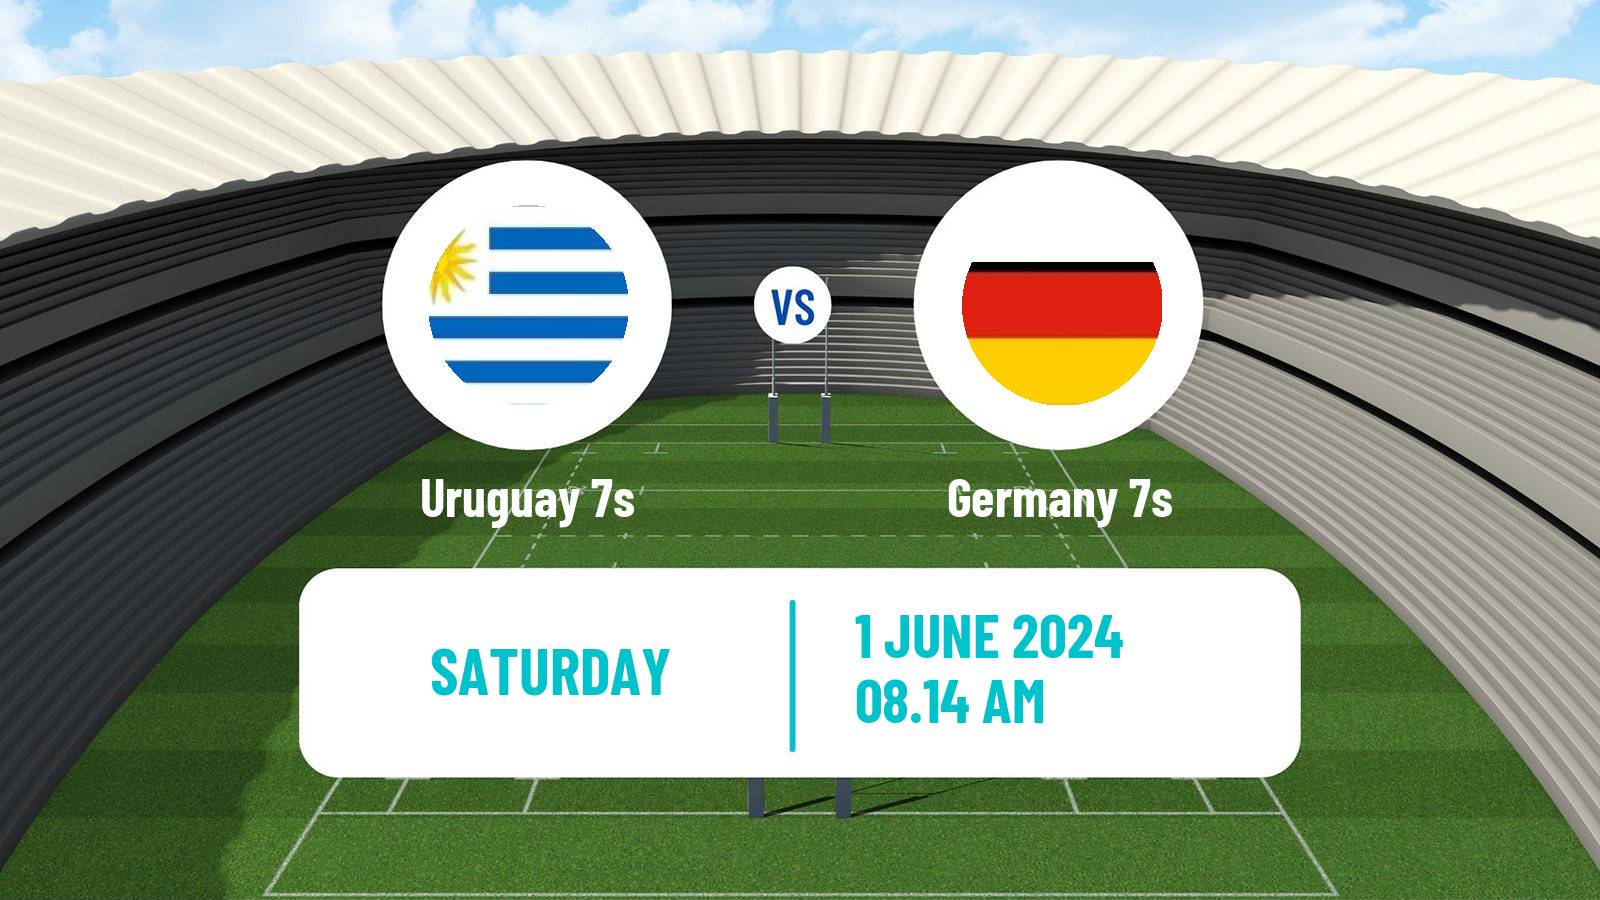 Rugby union Sevens World Series - Spain Uruguay 7s - Germany 7s